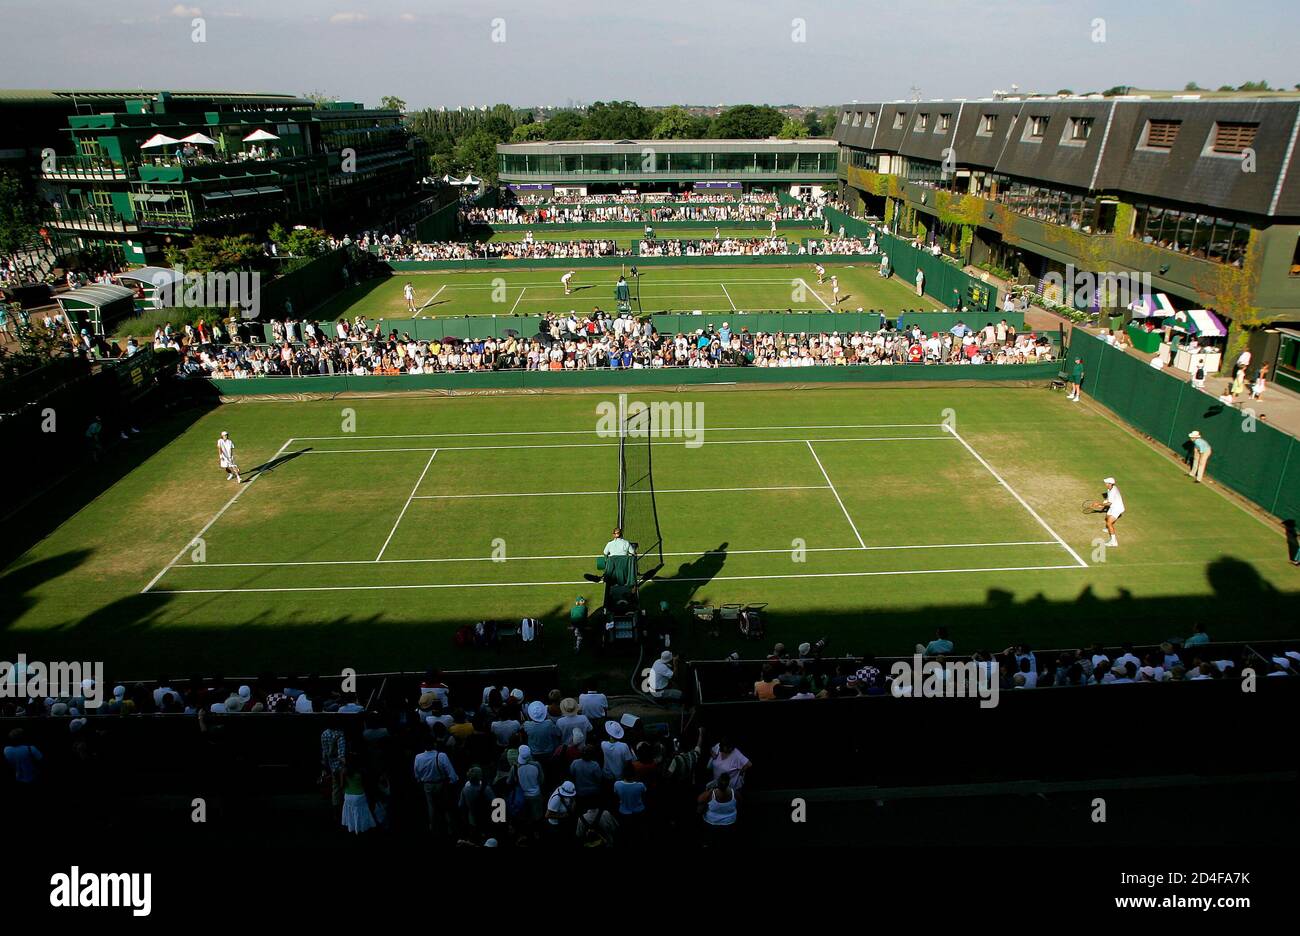 Grass Courts High Resolution Stock Photography And Images Alamy